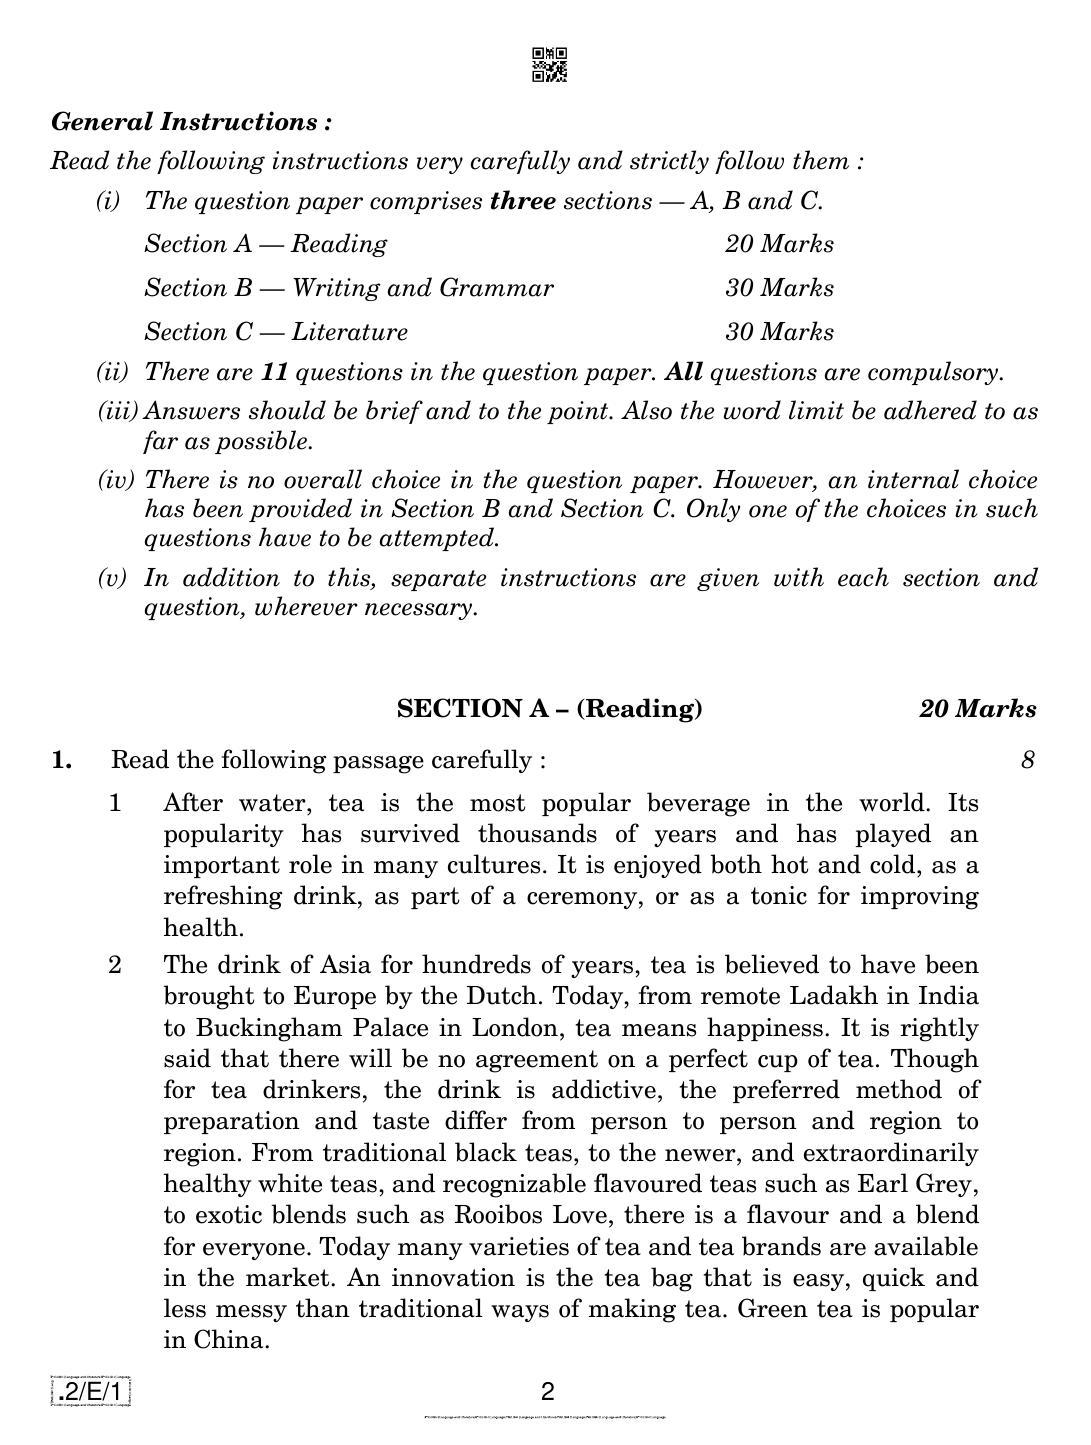 CBSE Class 10 2-C-1 Eng Lang. And Literature 2020 Compartment Question Paper - Page 2